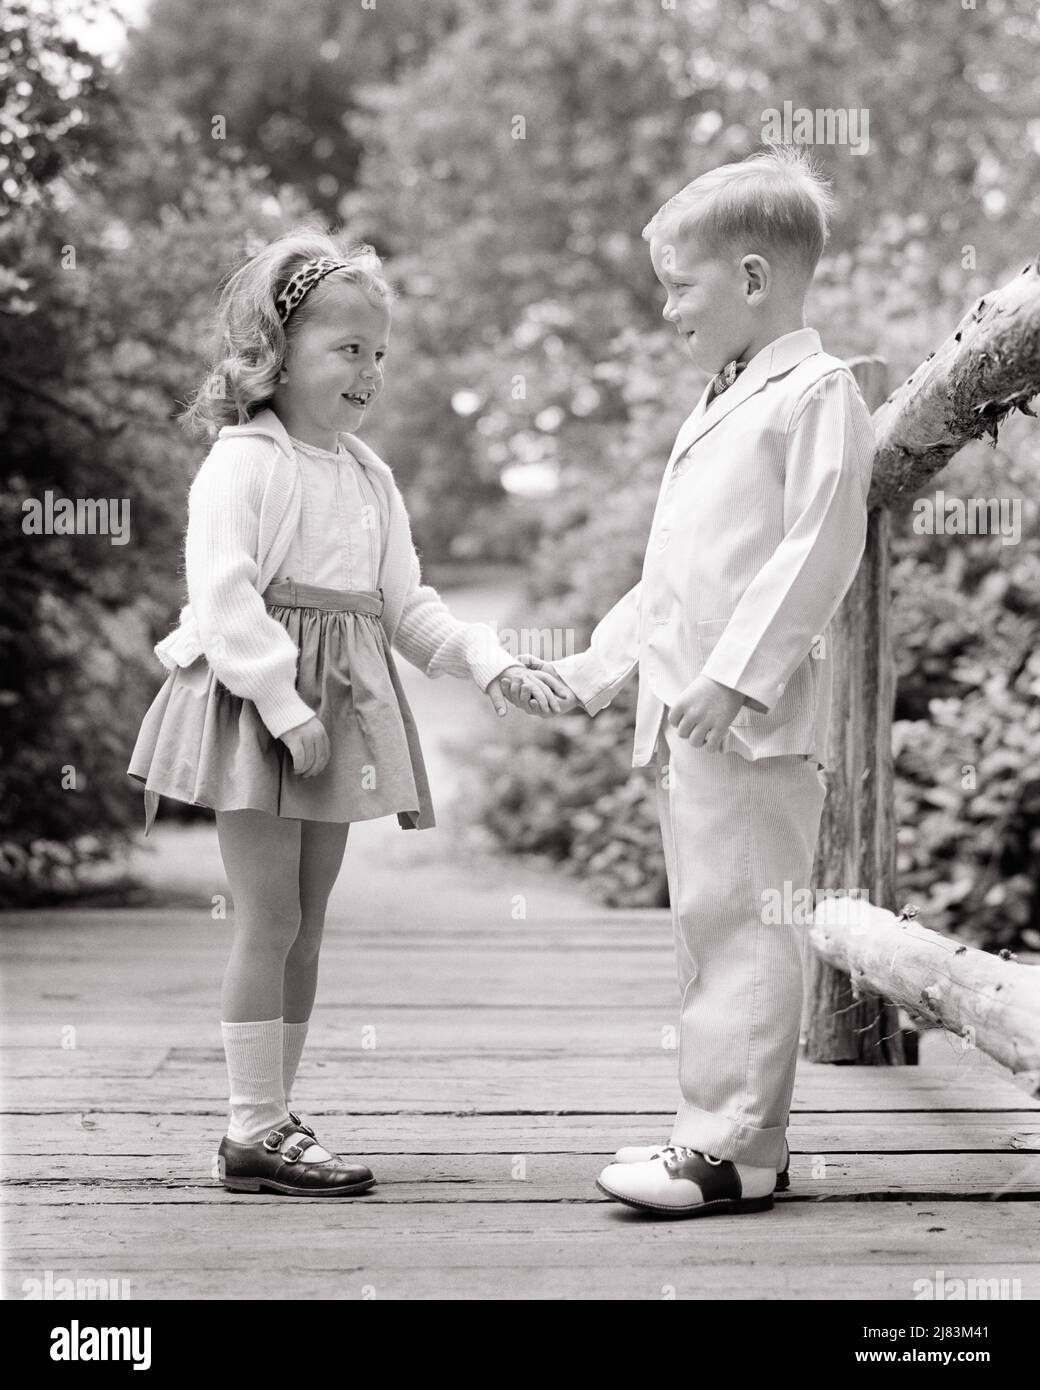 1960s SMALL BOY AND GIRL DRESSED UP STANDING ON WOODEN BRIDGE HOLDING HANDS SMILING AT ONE ANOTHER - j11319 HAR001 HARS JUVENILE STYLE COMMUNICATION FRIEND STRONG PLEASED JOY LIFESTYLE FEMALES HEALTHINESS HOME LIFE COPY SPACE FRIENDSHIP FULL-LENGTH PERSONS INSPIRATION BOYFRIEND CARING MALES CONFIDENCE B&W SUMMERTIME GIRLFRIEND SUIT AND TIE HAPPINESS CHEERFUL AND CHOICE SADDLE SHOES HOLDING HANDS UP RELATIONSHIPS SMILES SADDLE OXFORDS SHORT DRESS FRIENDLY JOYFUL STYLISH SUNDAY BEST PERSONAL ATTACHMENT PUPPY LOVE AFFECTION ANOTHER CARDIGAN EMOTION JUVENILES MARY JANE SHOES SEASON TOGETHERNESS Stock Photo